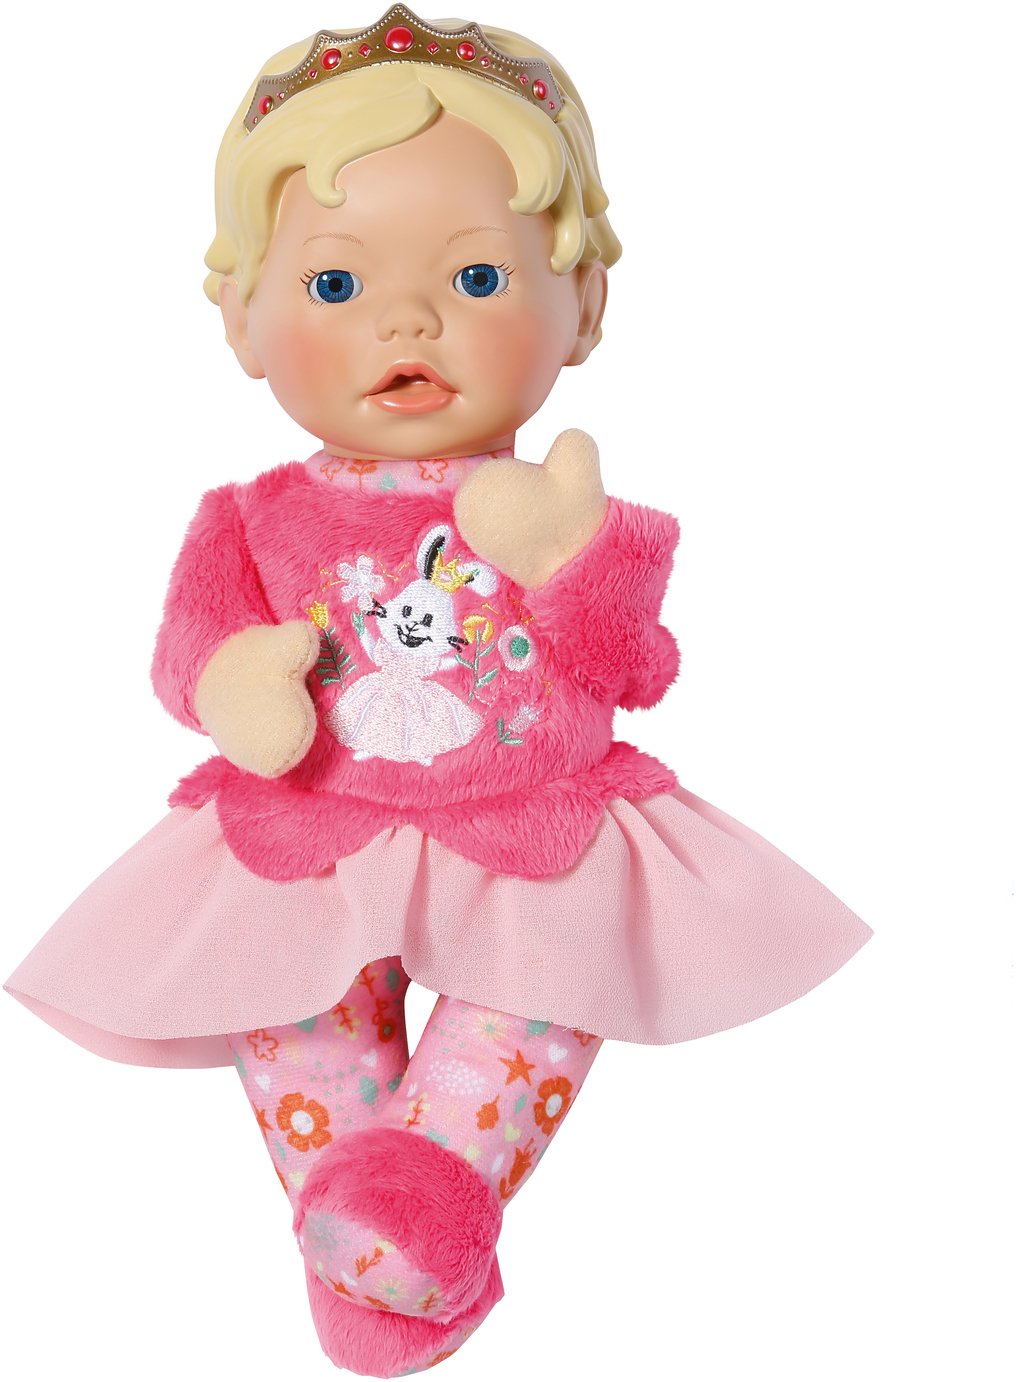 BABY born Princess For Babies Doll - 8inch/21cm